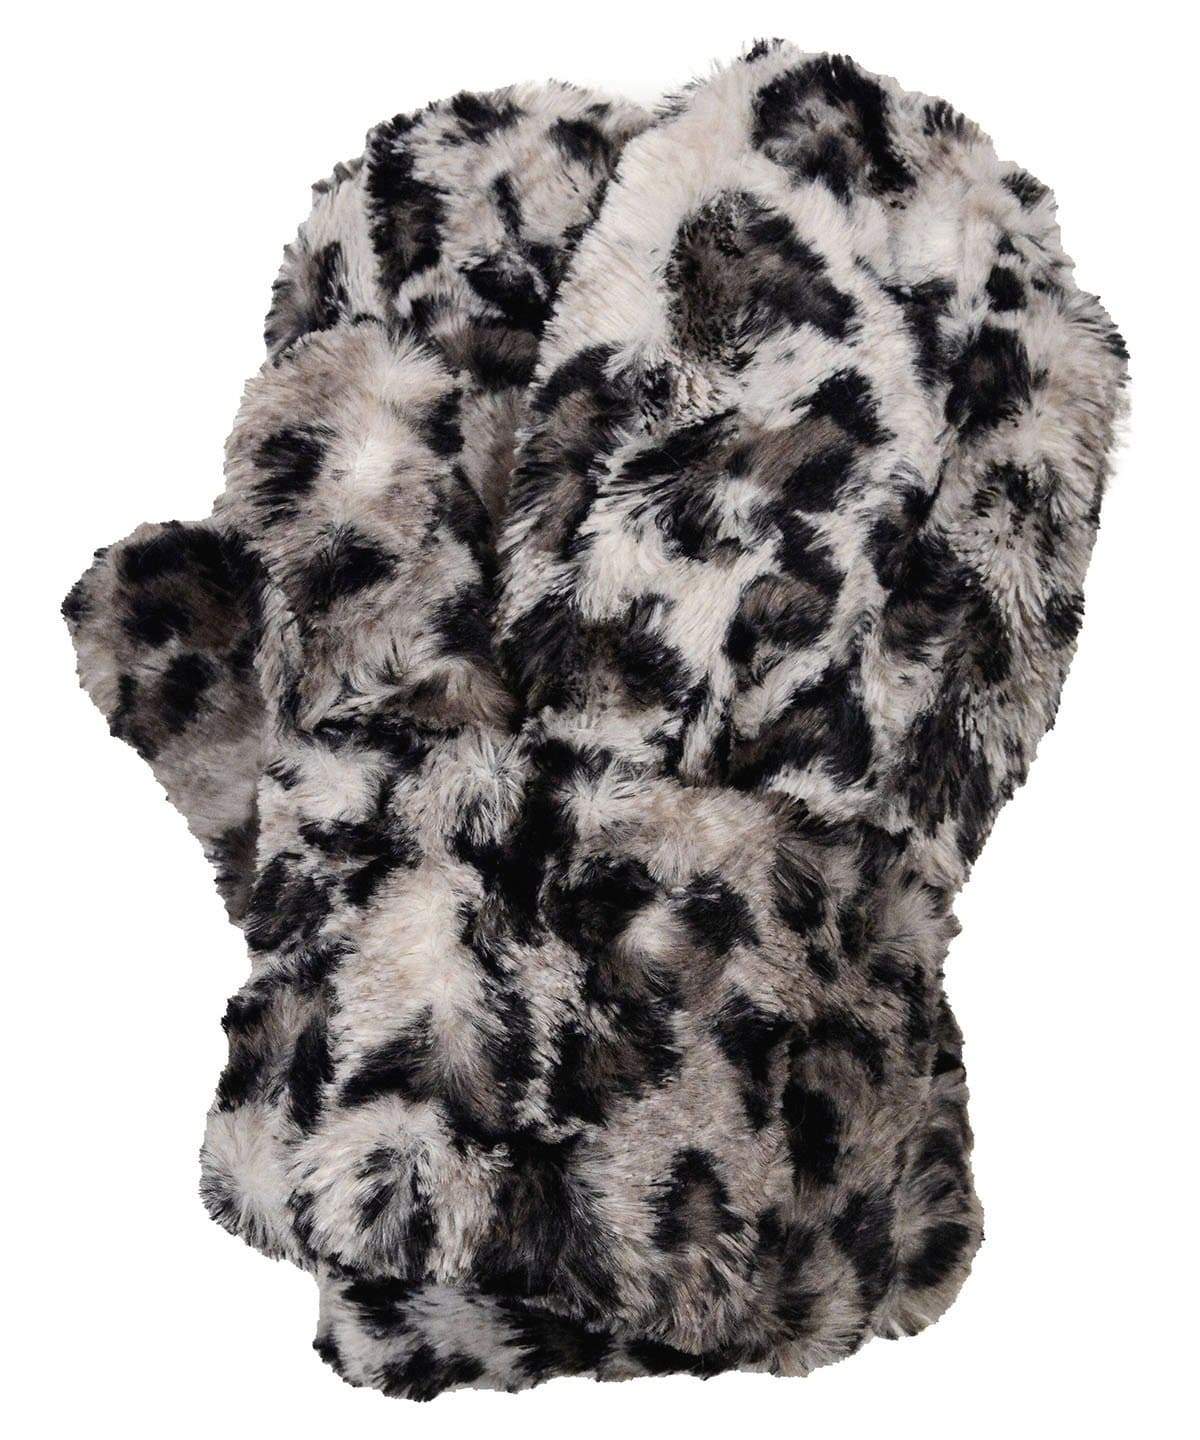 Men’s Product shot of Mittens. Gauntlets Mitts, | Savannah Cat animal print in black, cream and gray Faux Fur | Handmade by Pandemonium Millinery Seattle, WA USA